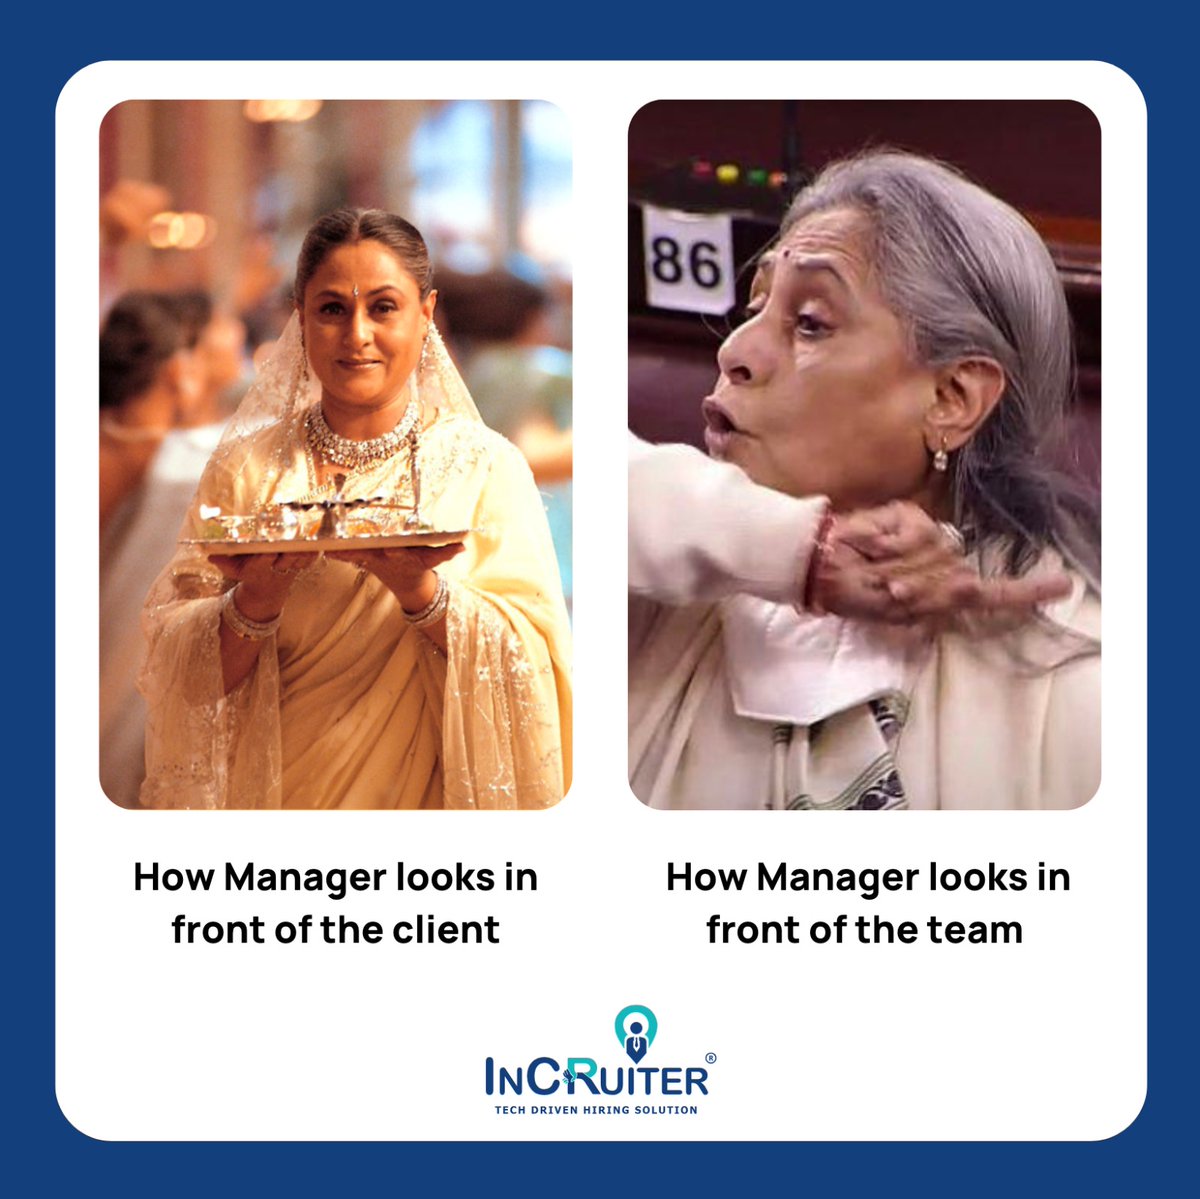 We've all been there 😜 . . #memes #fridaymeme #corporatememes #funfriday #incruiter